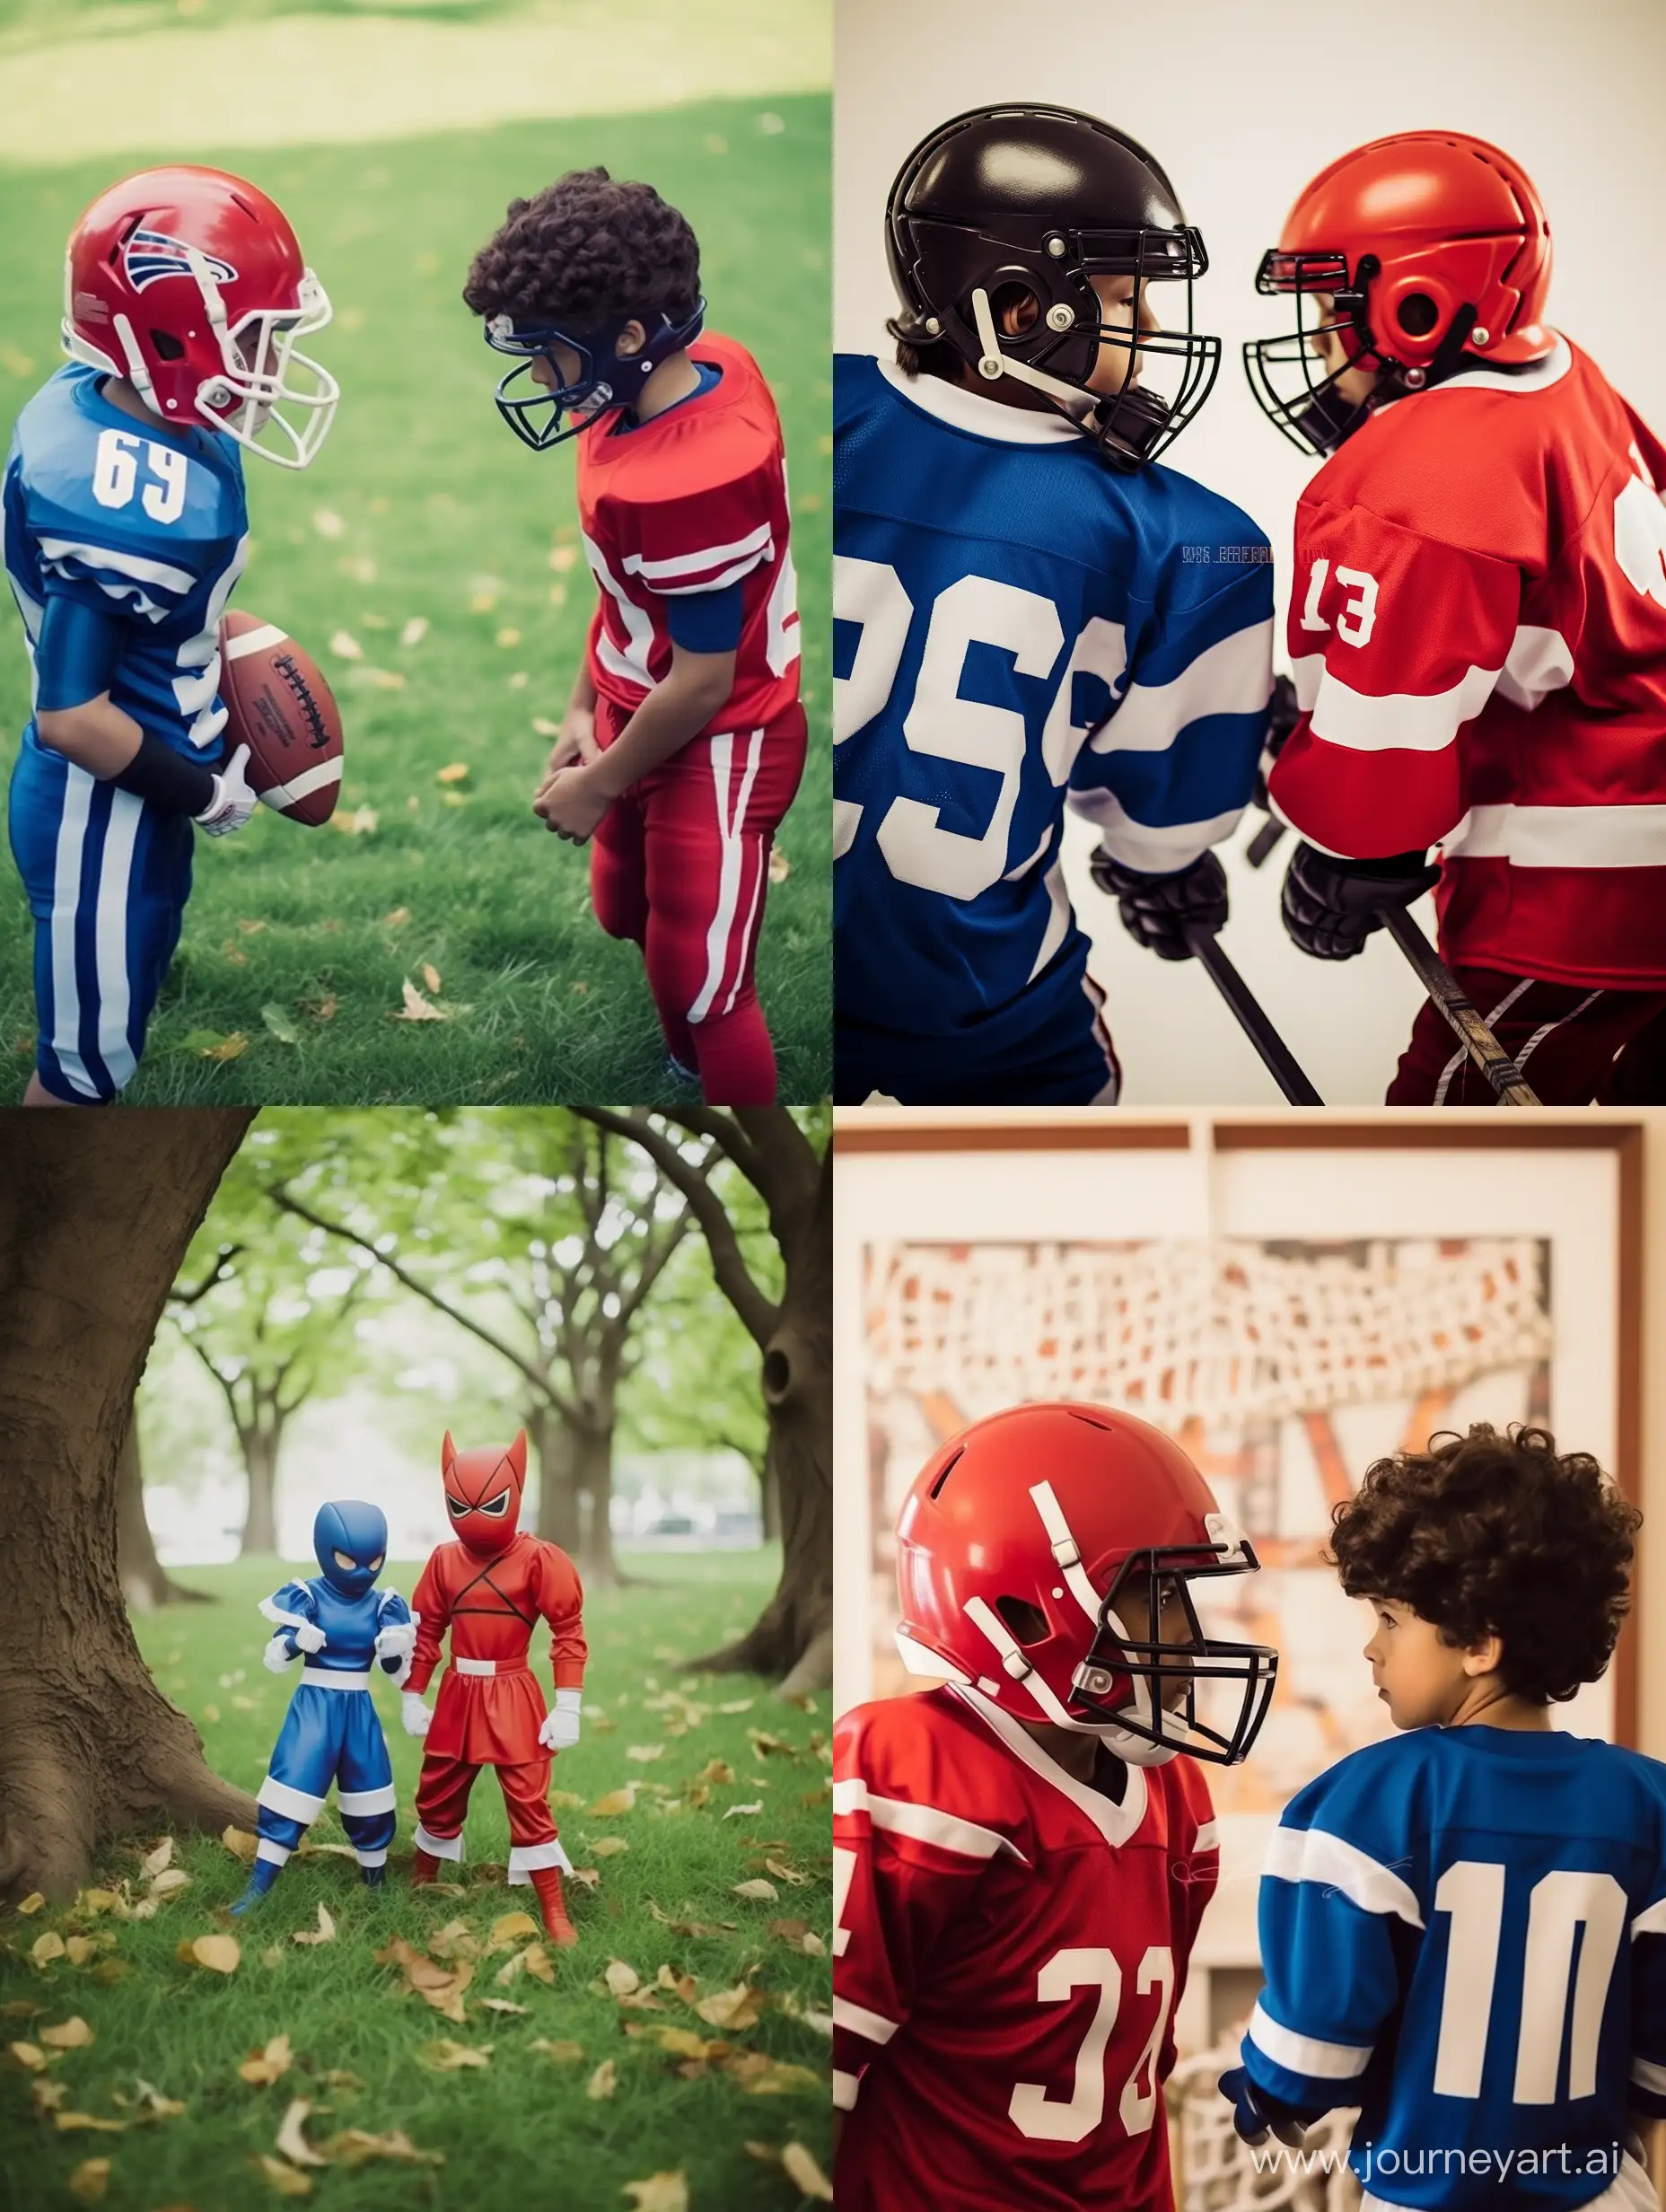 two teams of kids standing againts each other face to face, one team in red  costume and other in blue custome